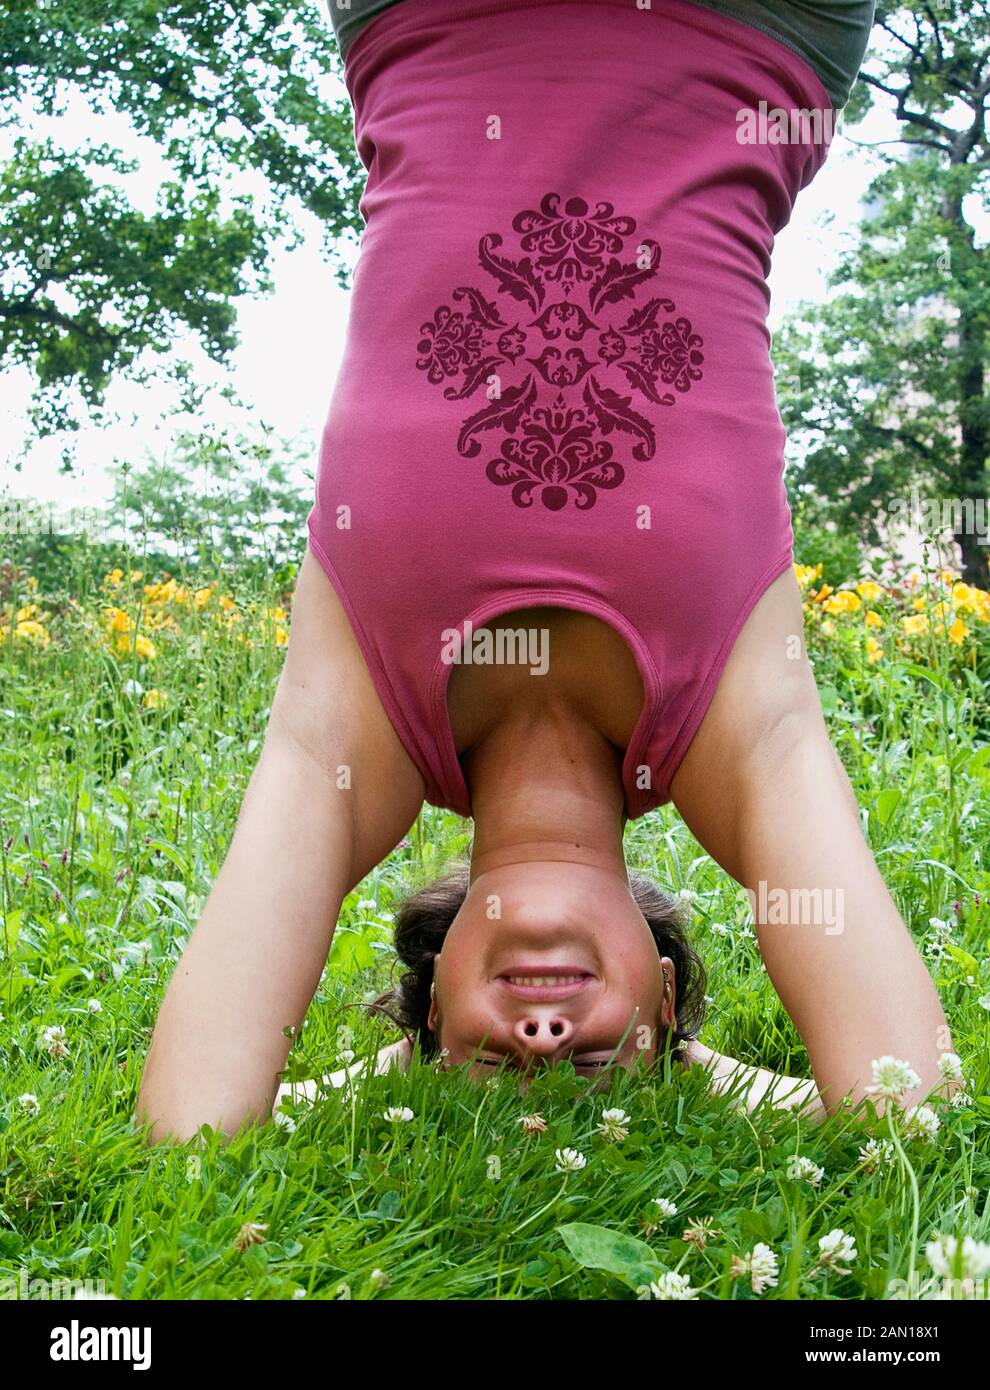 A woman doing a headstand Stock Photo